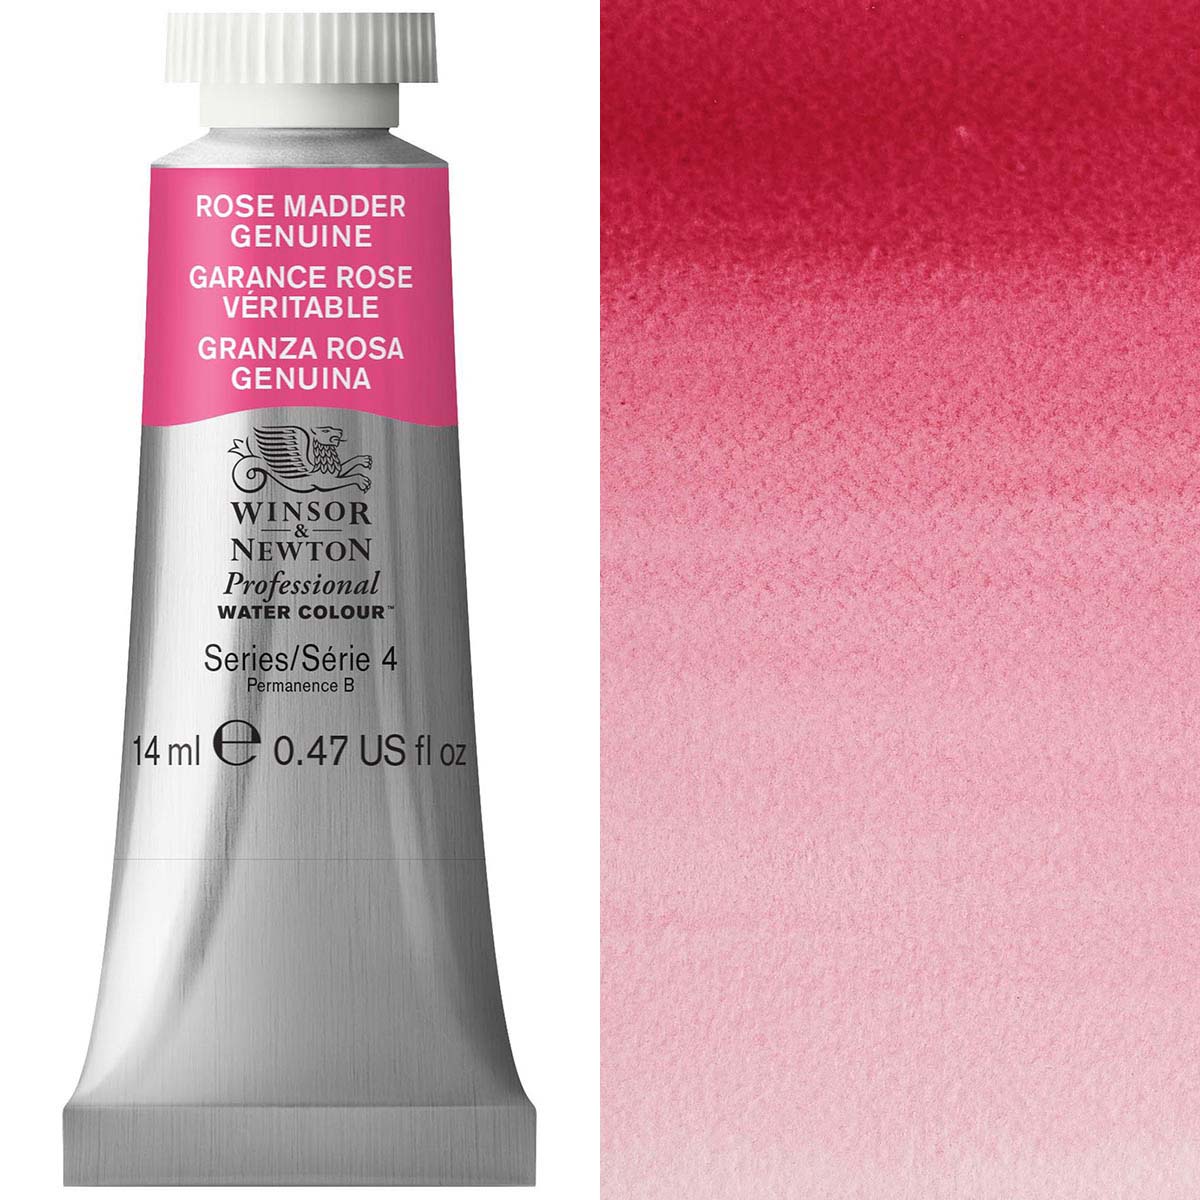 Winsor and Newton - Professional Artists' Watercolour - 14ml - Rose Madd Genuine